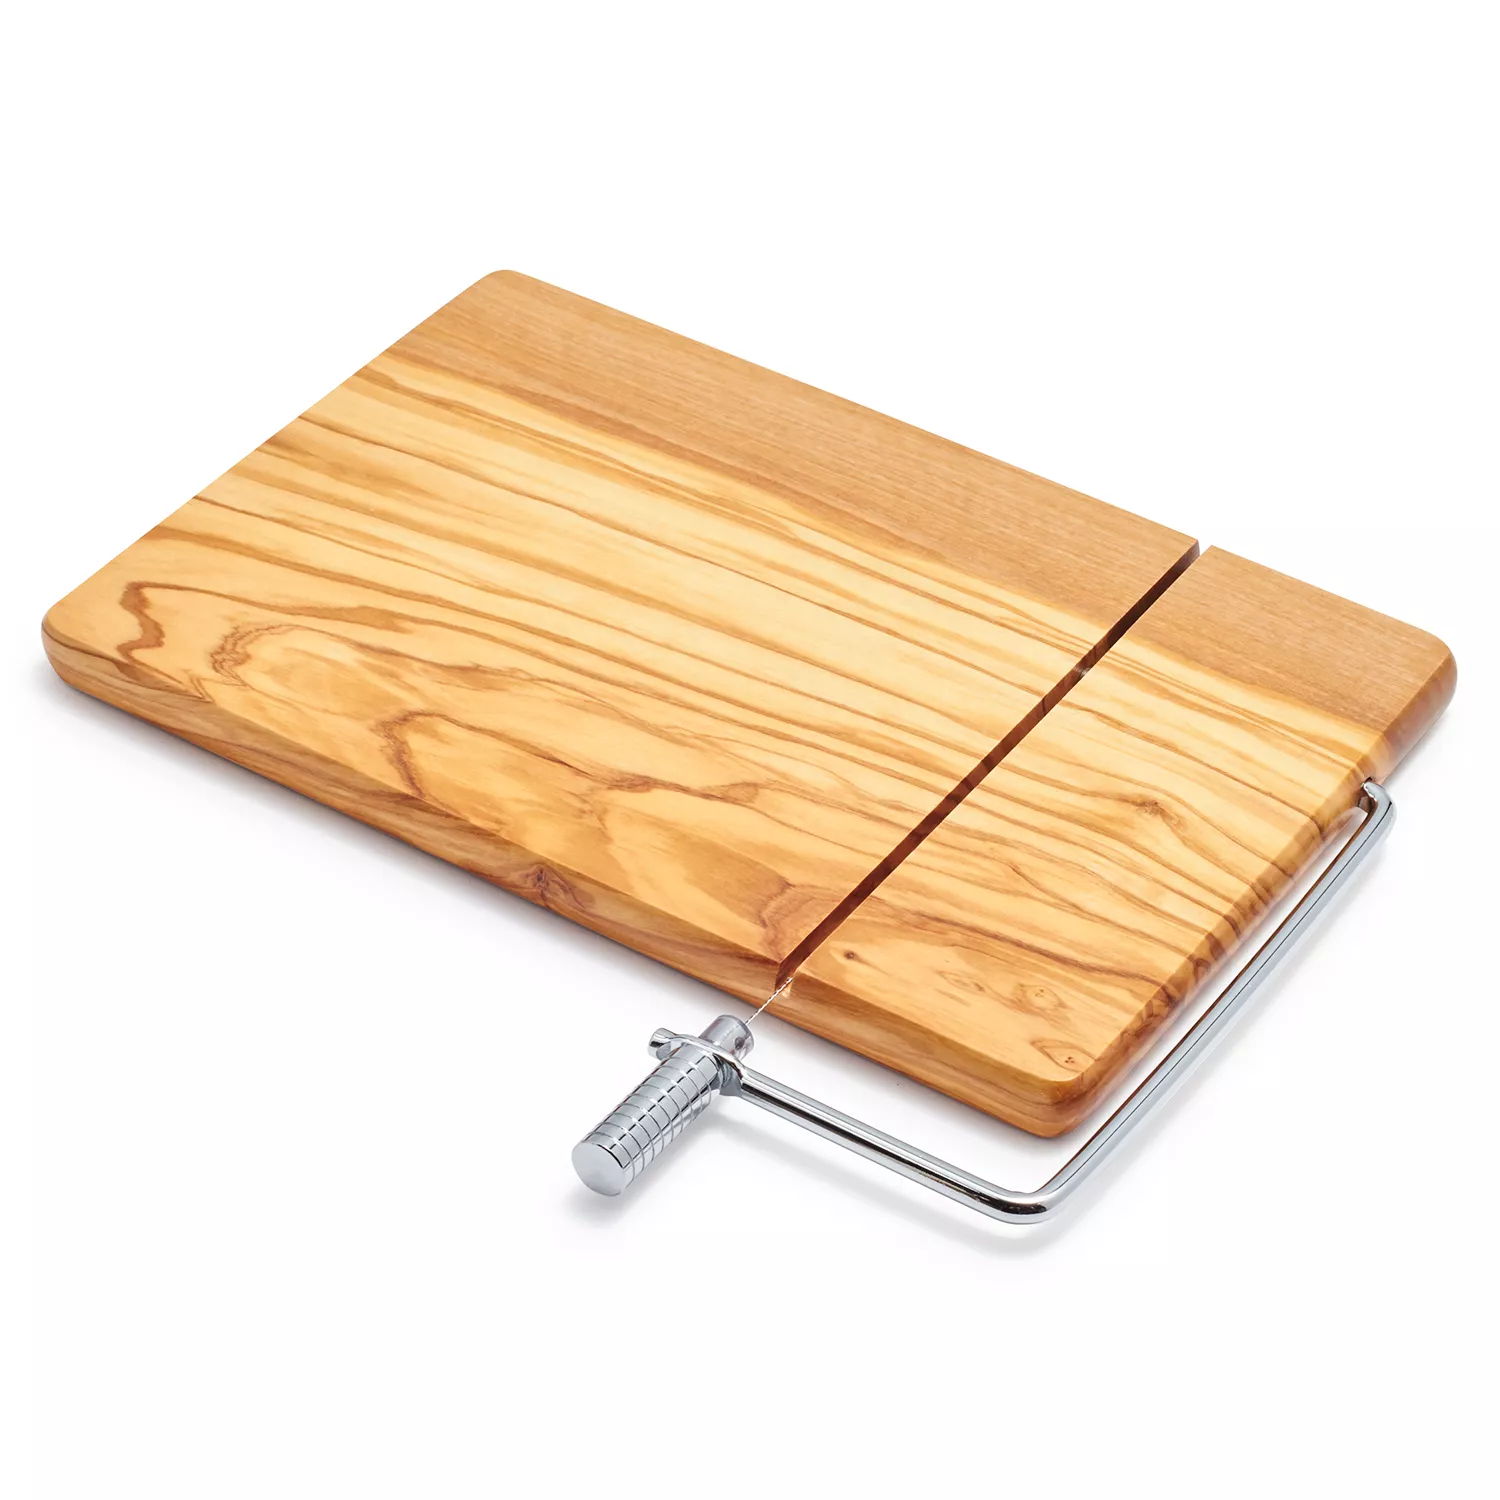 Olivewood Cheese Board with Built-In Slicer